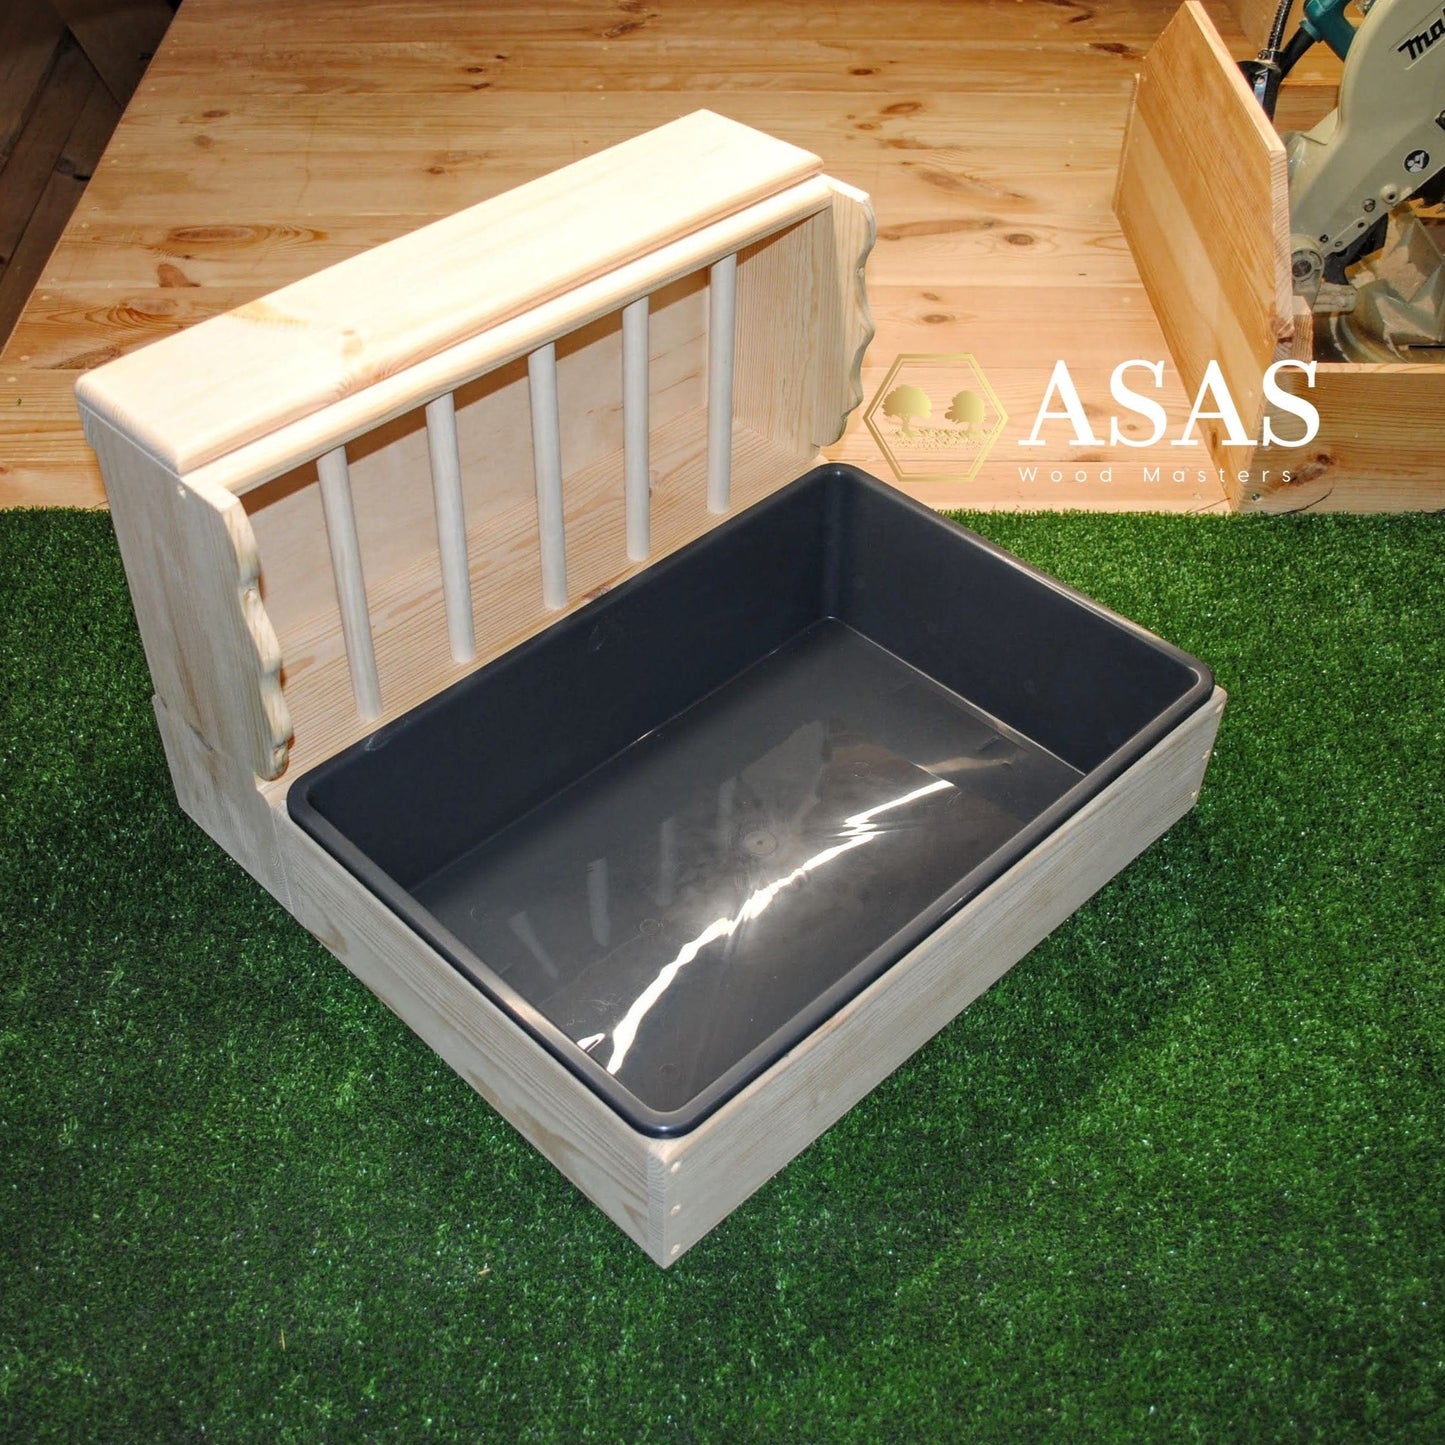 Rabbit hay feeder with litter box large size, made by asaswood